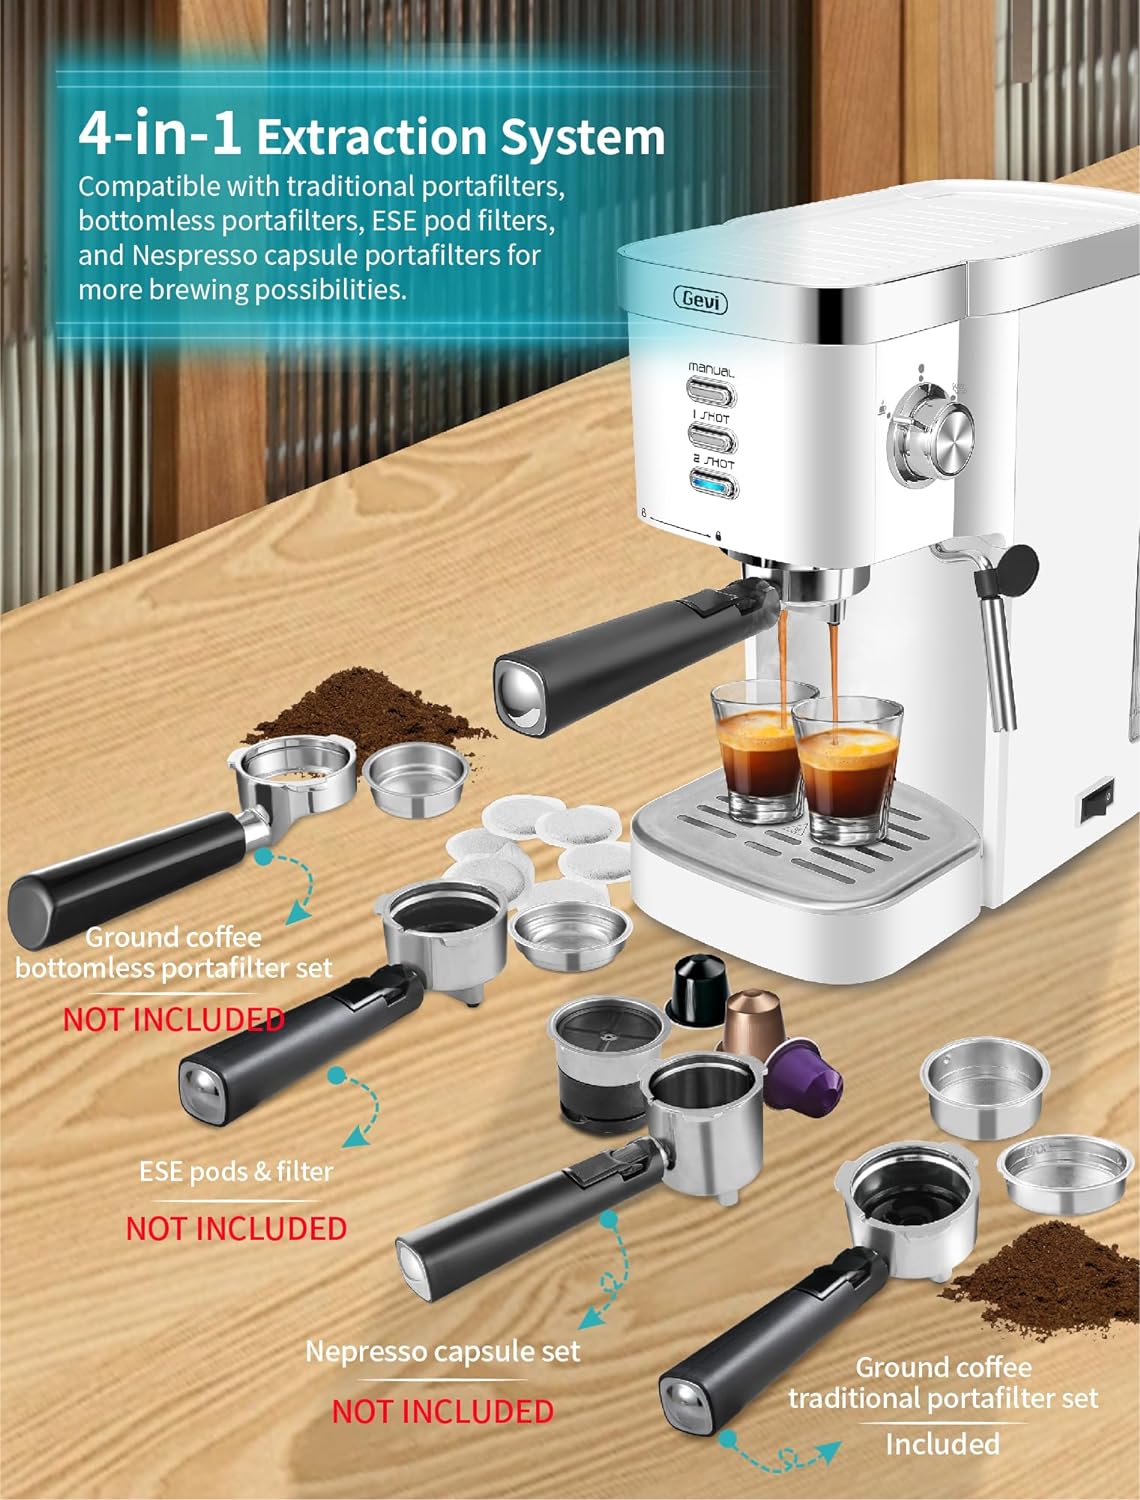 Gevi Espresso Machines 20 Bar Fast Heating Automatic Cappuccino Coffee Maker with Foaming Milk Frother Wand for Espresso, Latte Macchiato, Coffee Serving Sets